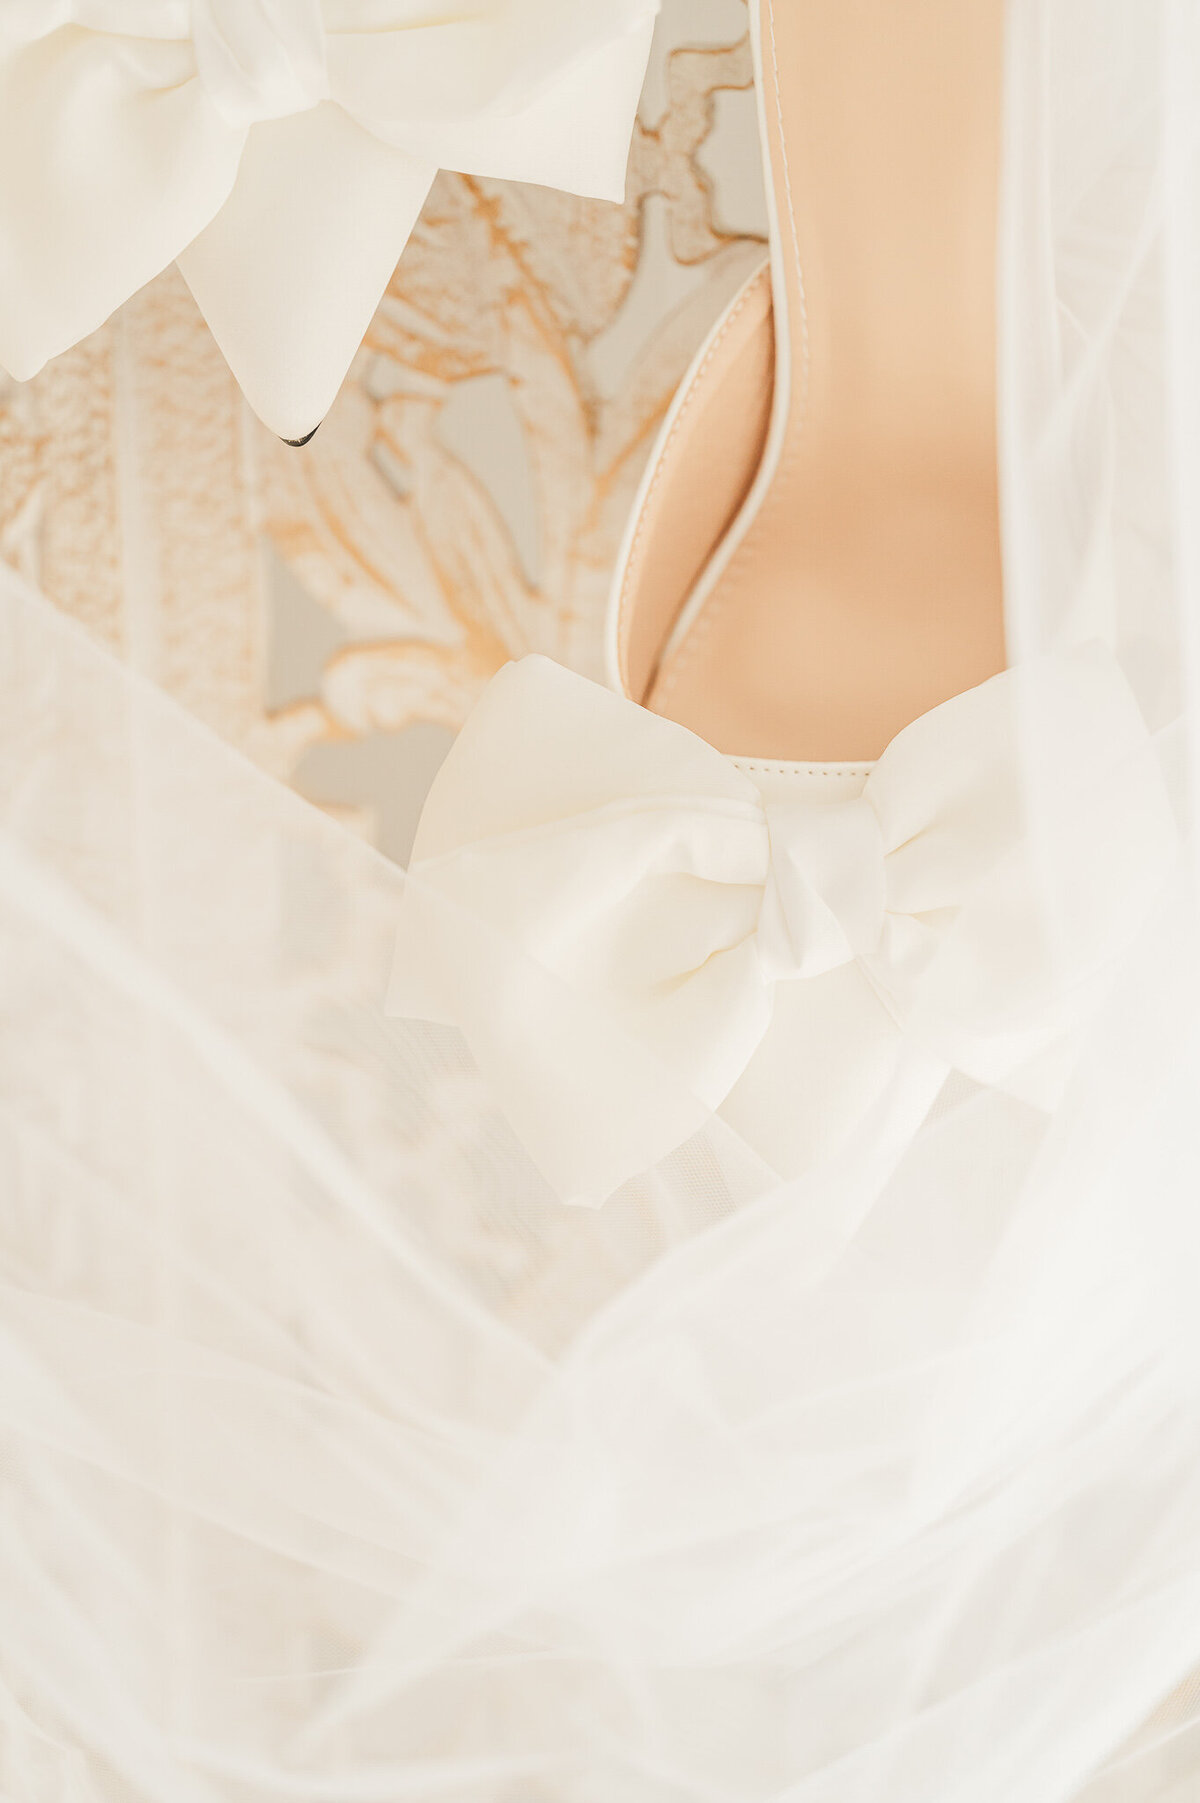 Warm romantic detail shot of a bride's wedding shoes and wedding veil by JoLynn Photography